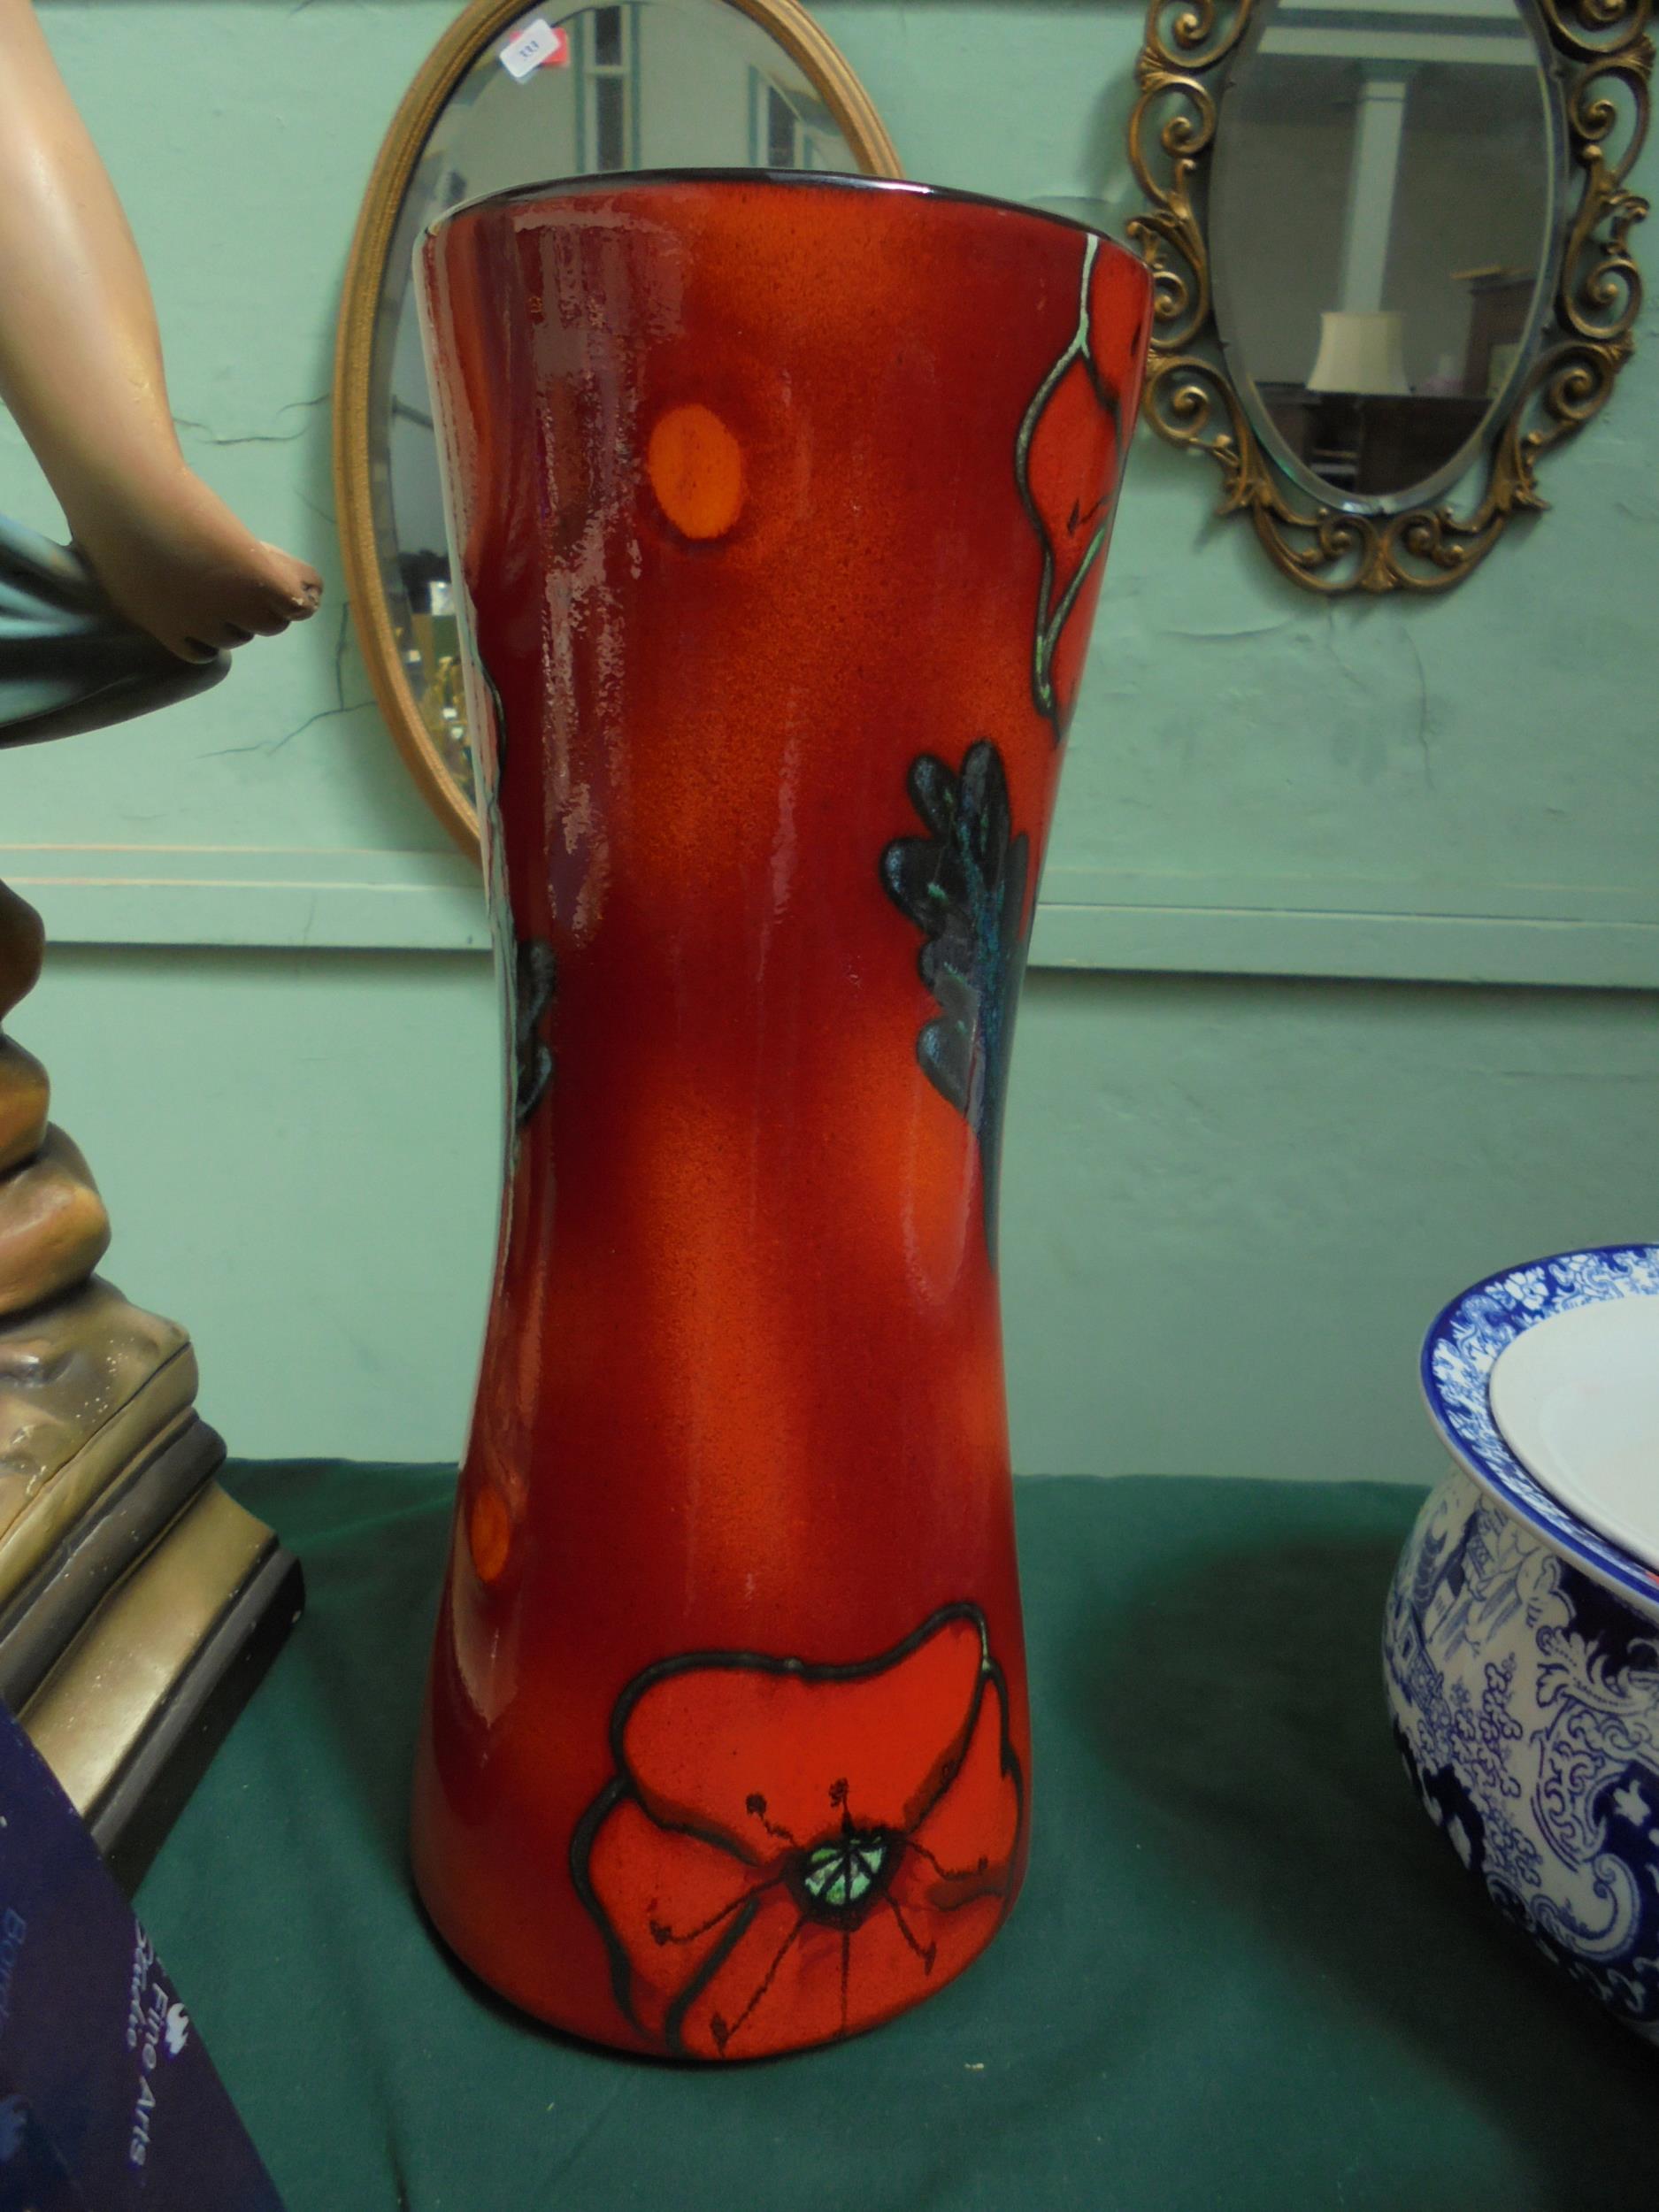 Large 60's style Poole Pottery vase with red poppies